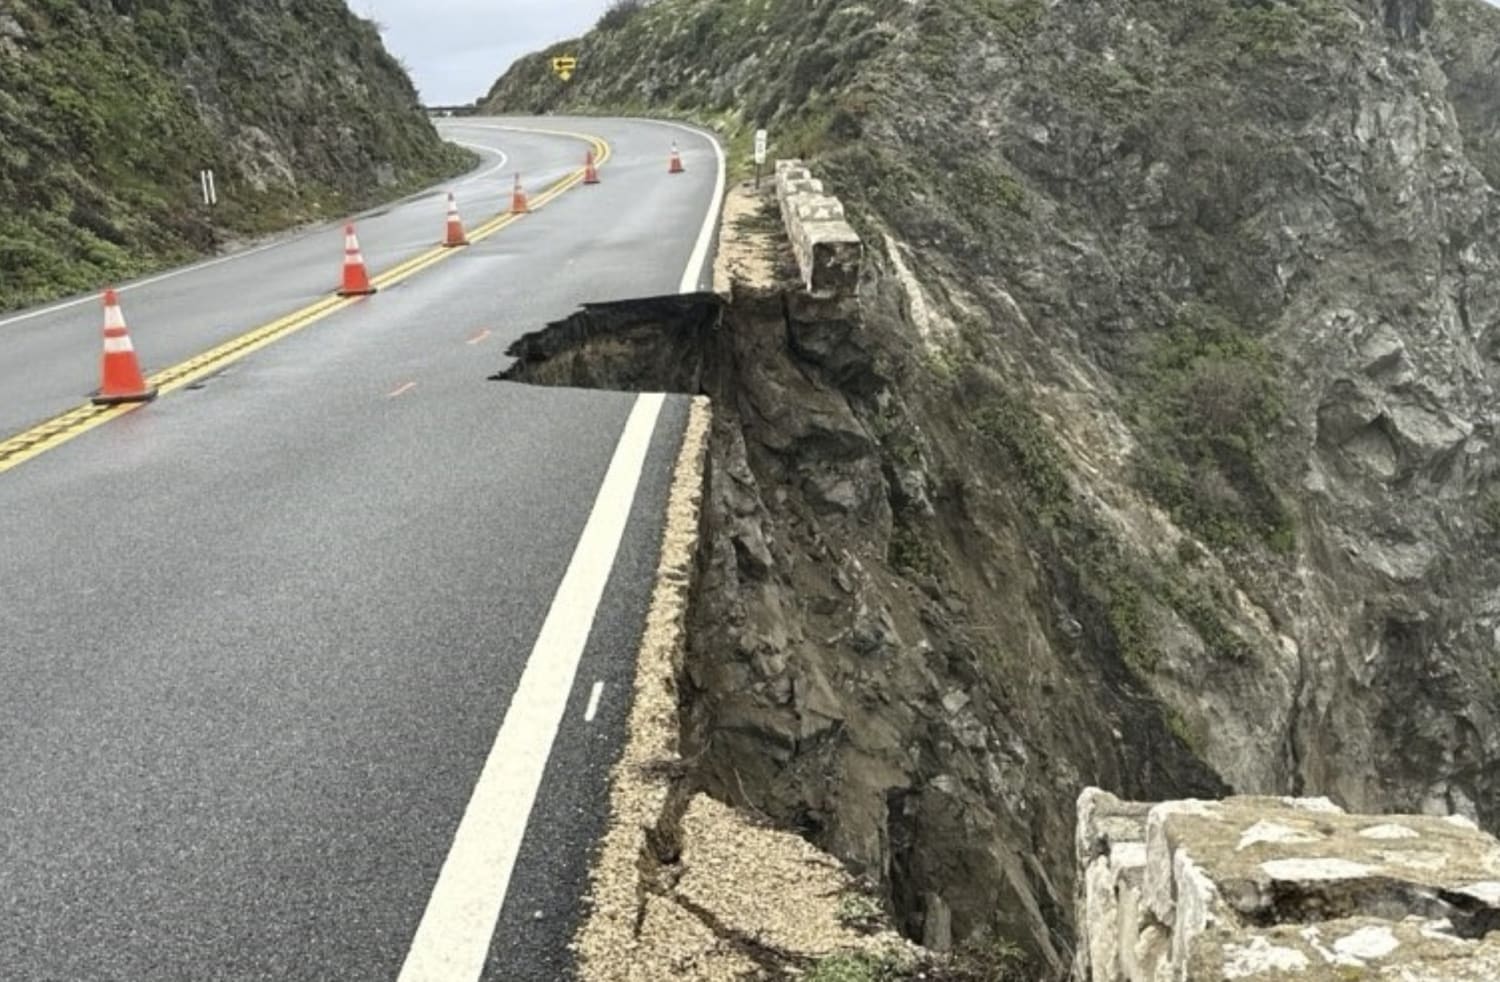 A section of California's scenic Highway 1 collapsed in the storm